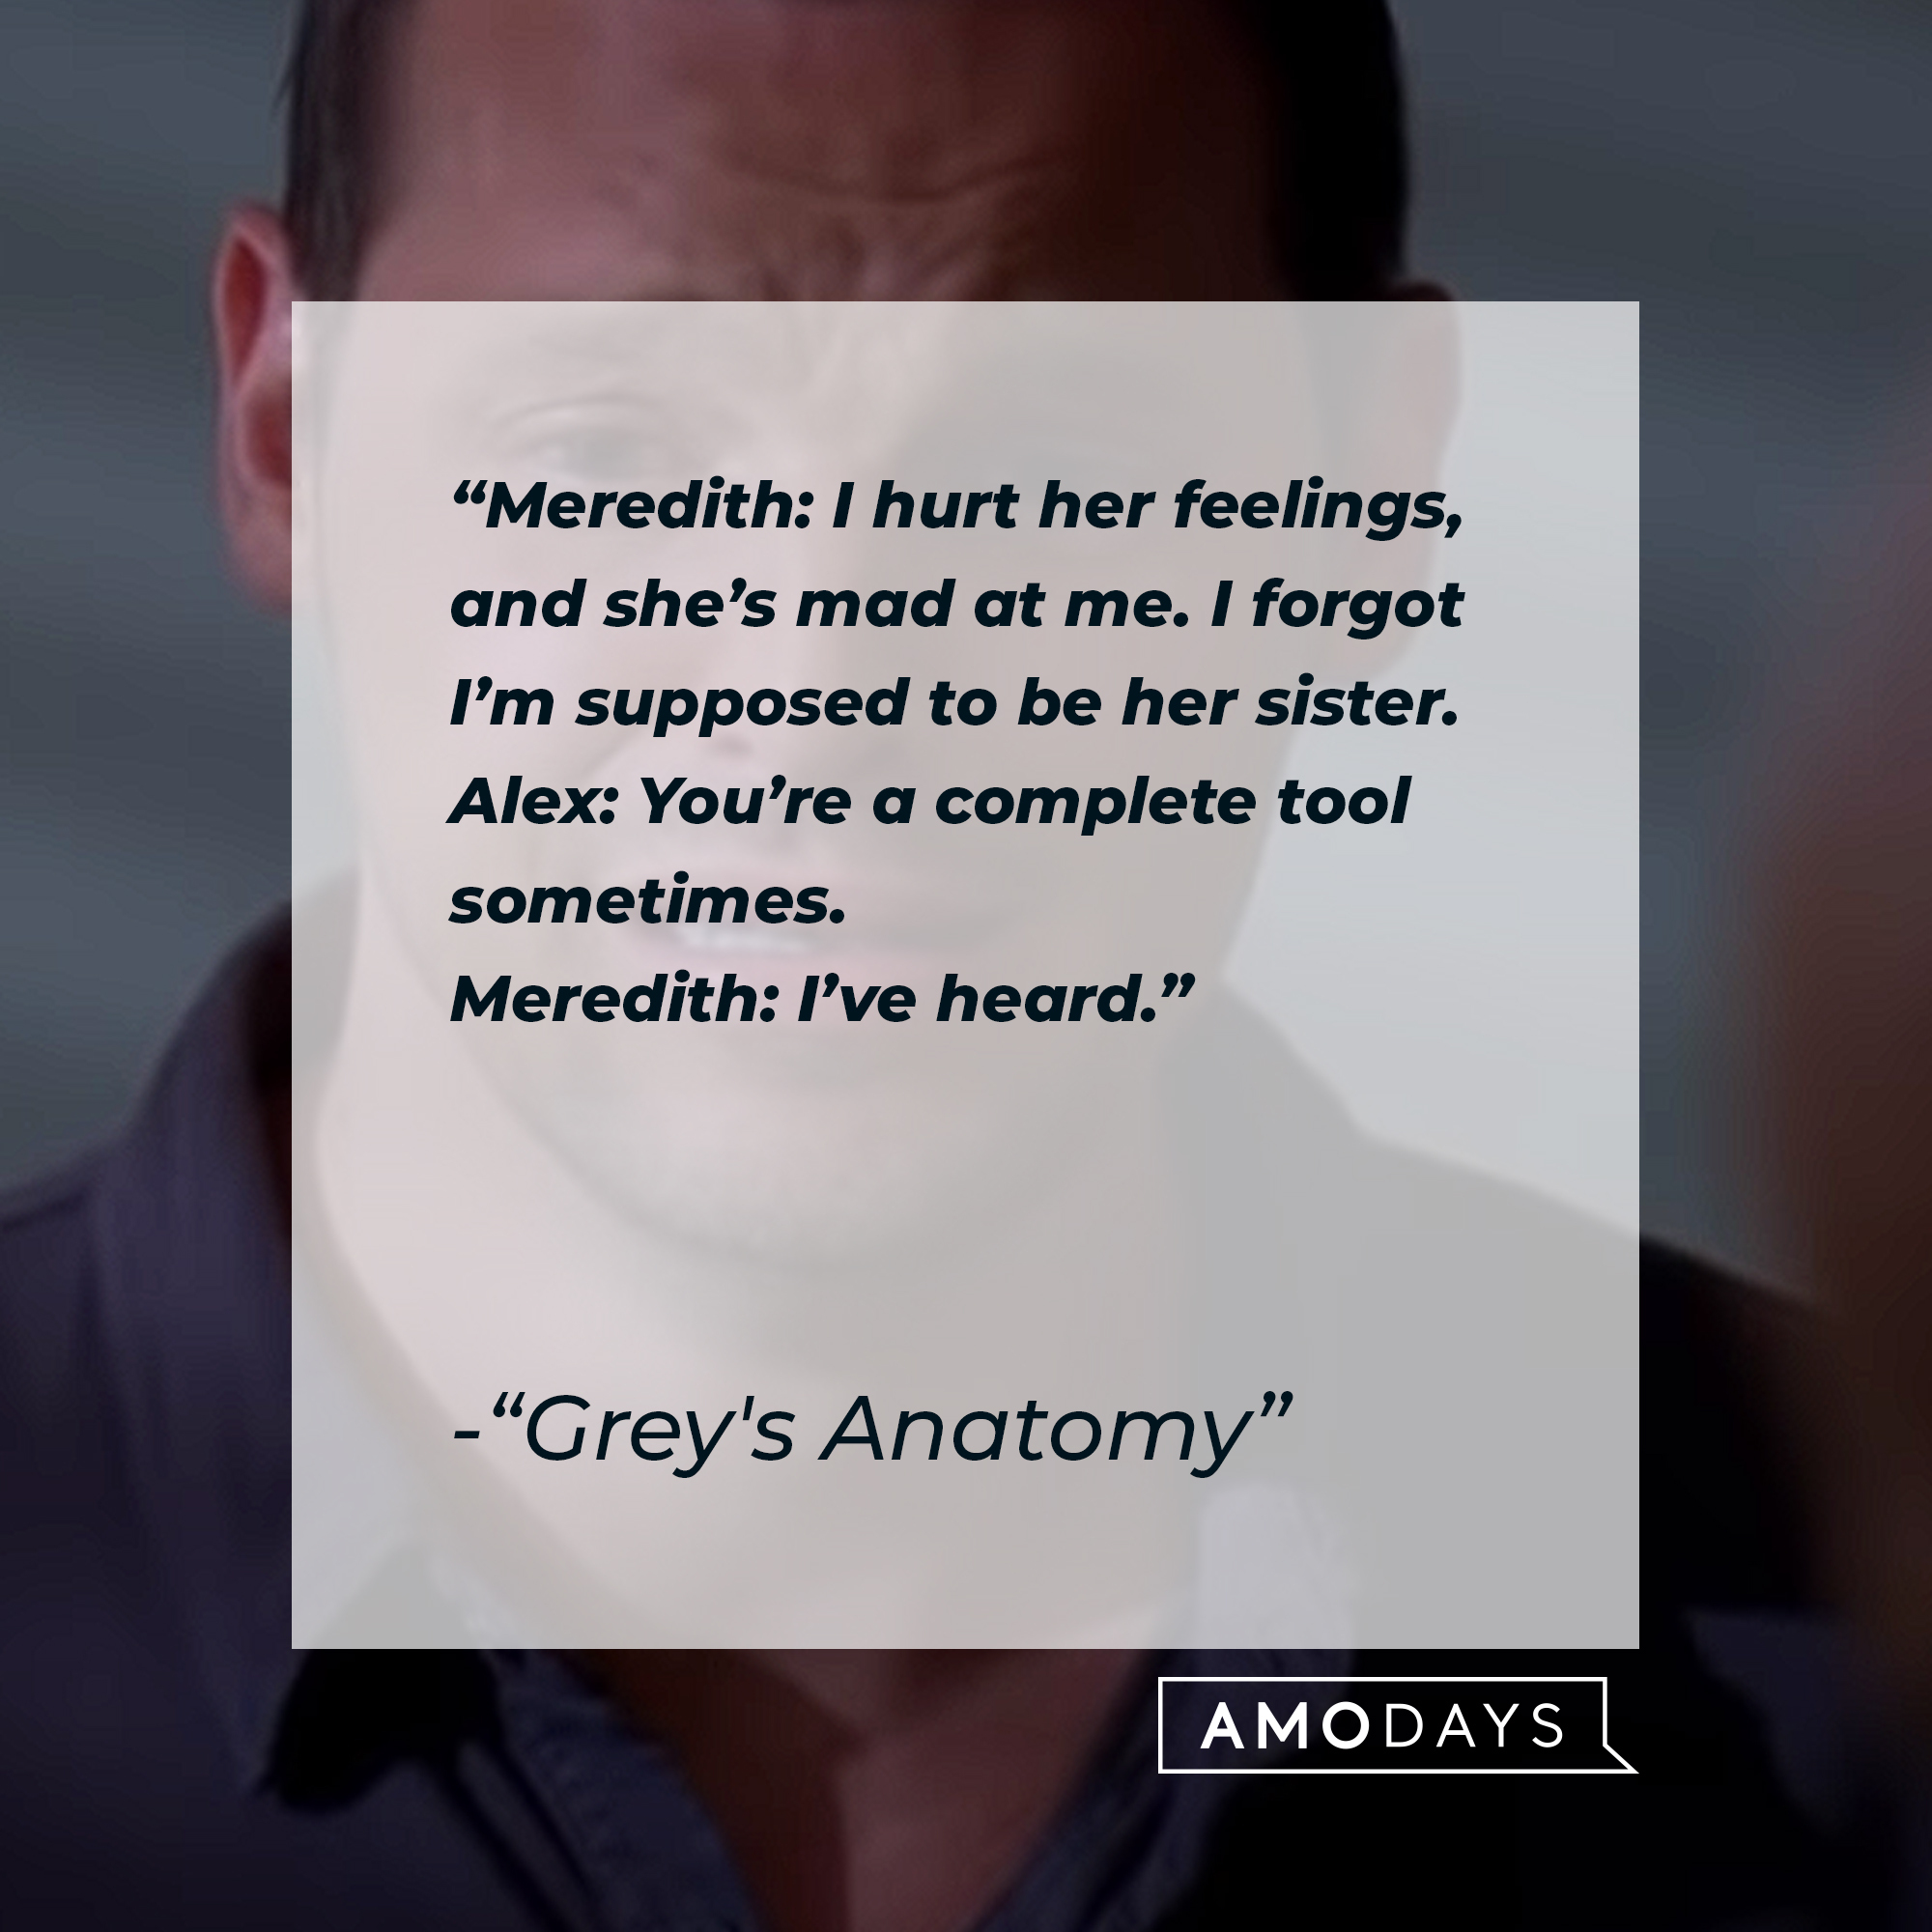 Quote from “Grey’s Anatomy”: “Meredith: I hurt her feelings, and she’s mad at me. I forgot I’m supposed to be her sister. Alex: You’re a complete tool sometimes. Meredith: I’ve heard.” | Source: youtube.com/ABCNetwork